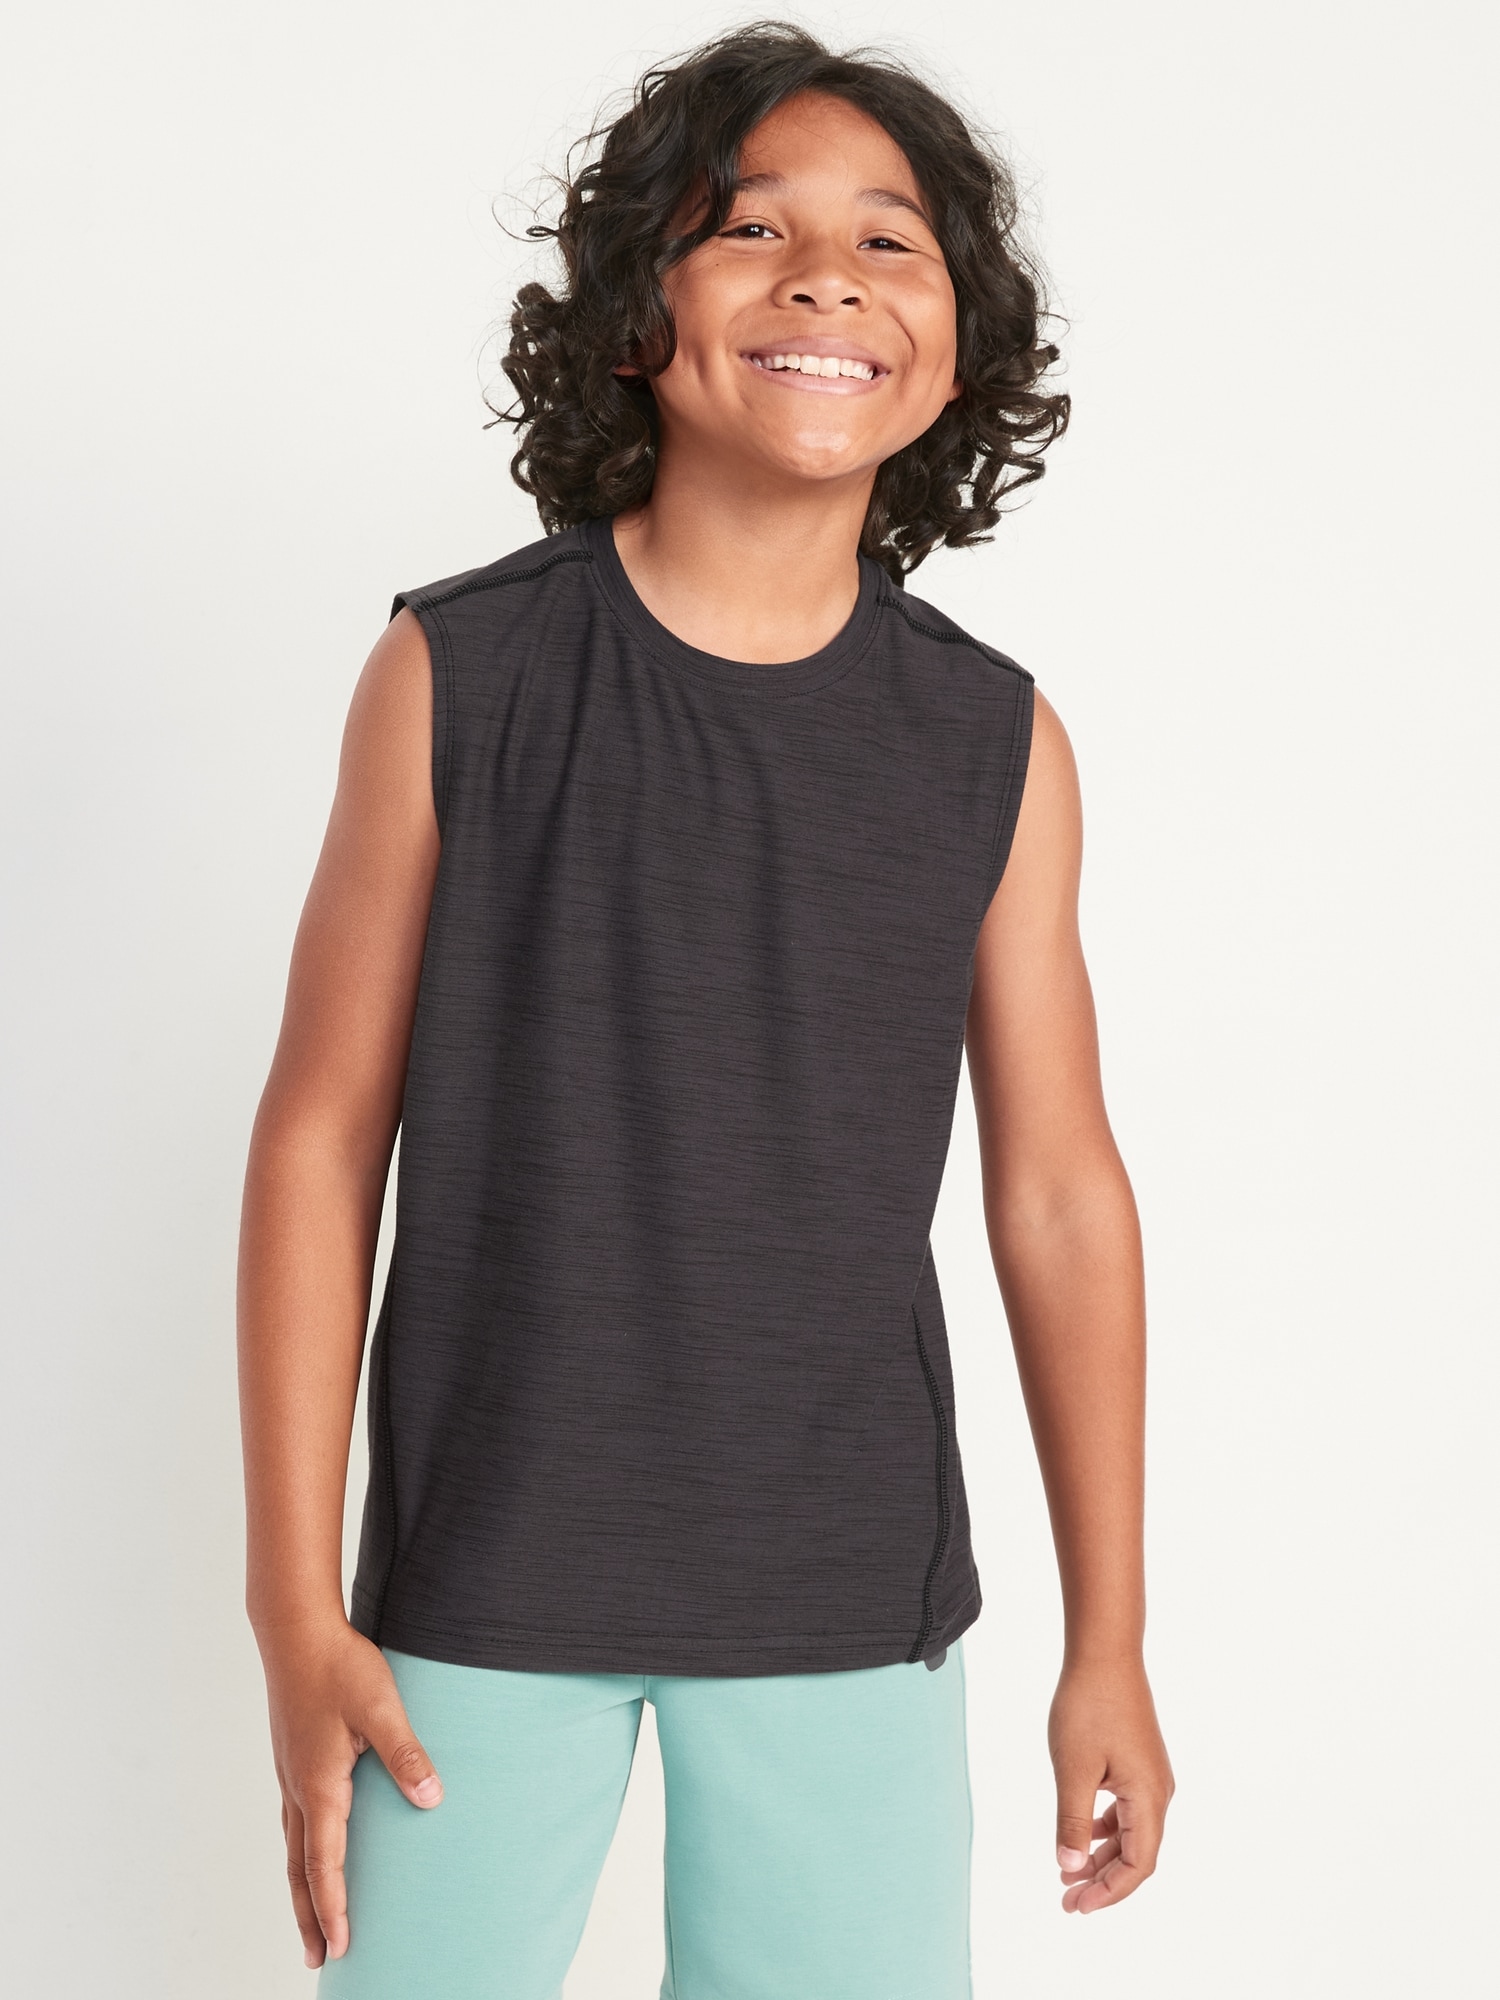 Old Navy Breathe ON Performance Tank Top for Boys black. 1